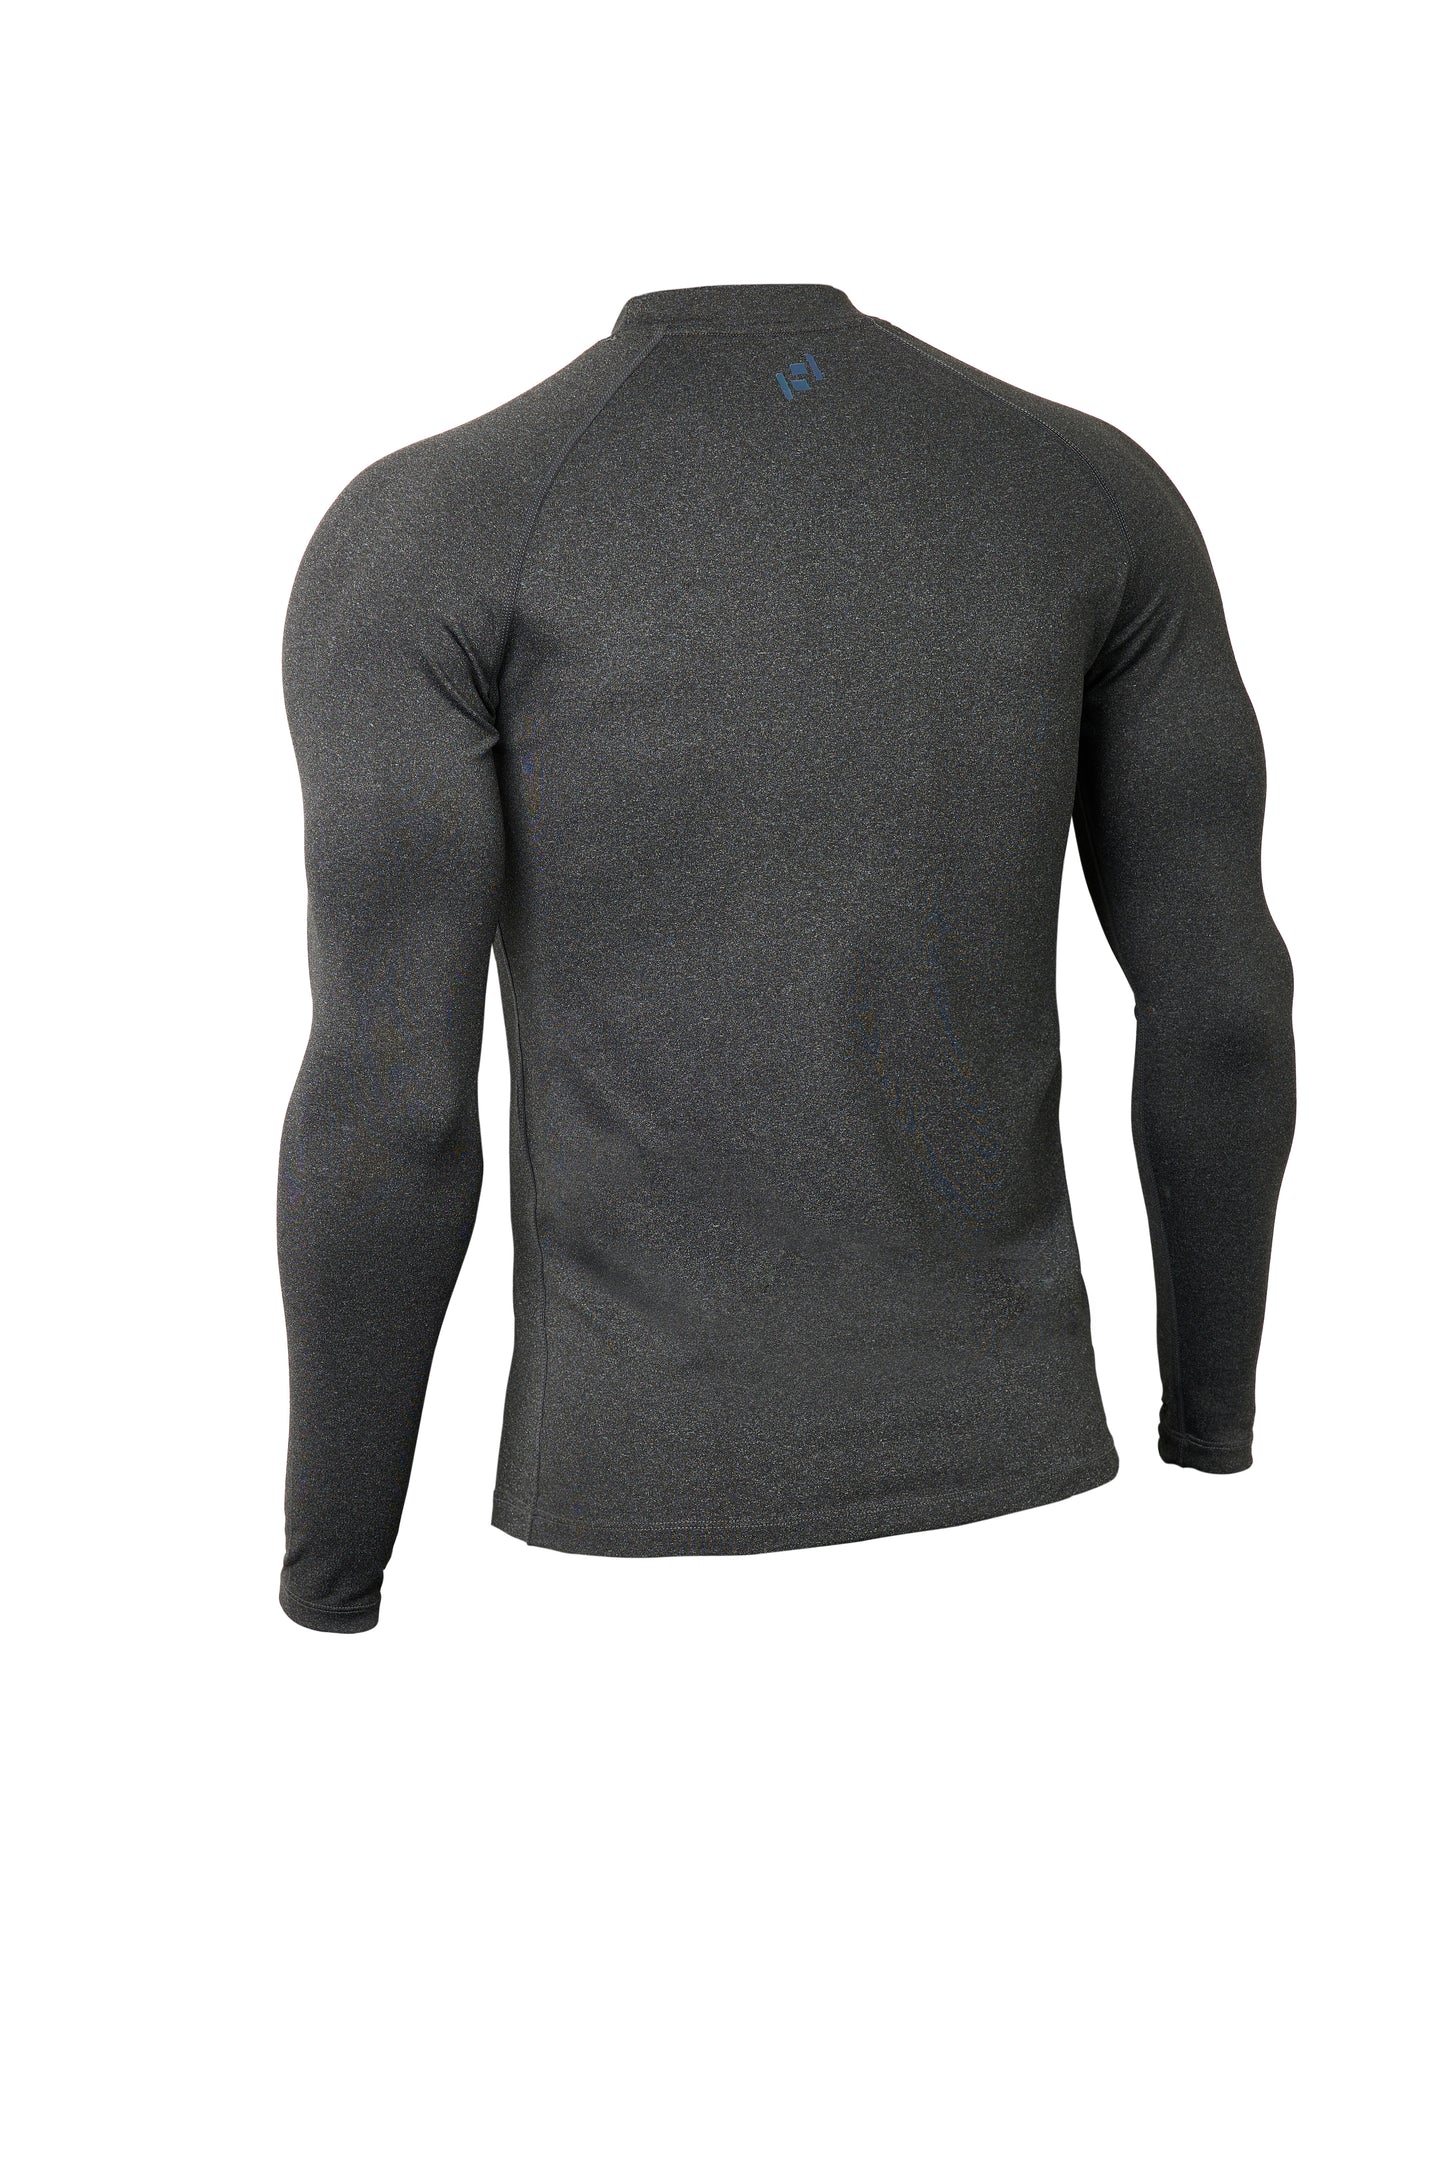 Essential Thermal Base Layer Shirt Grey